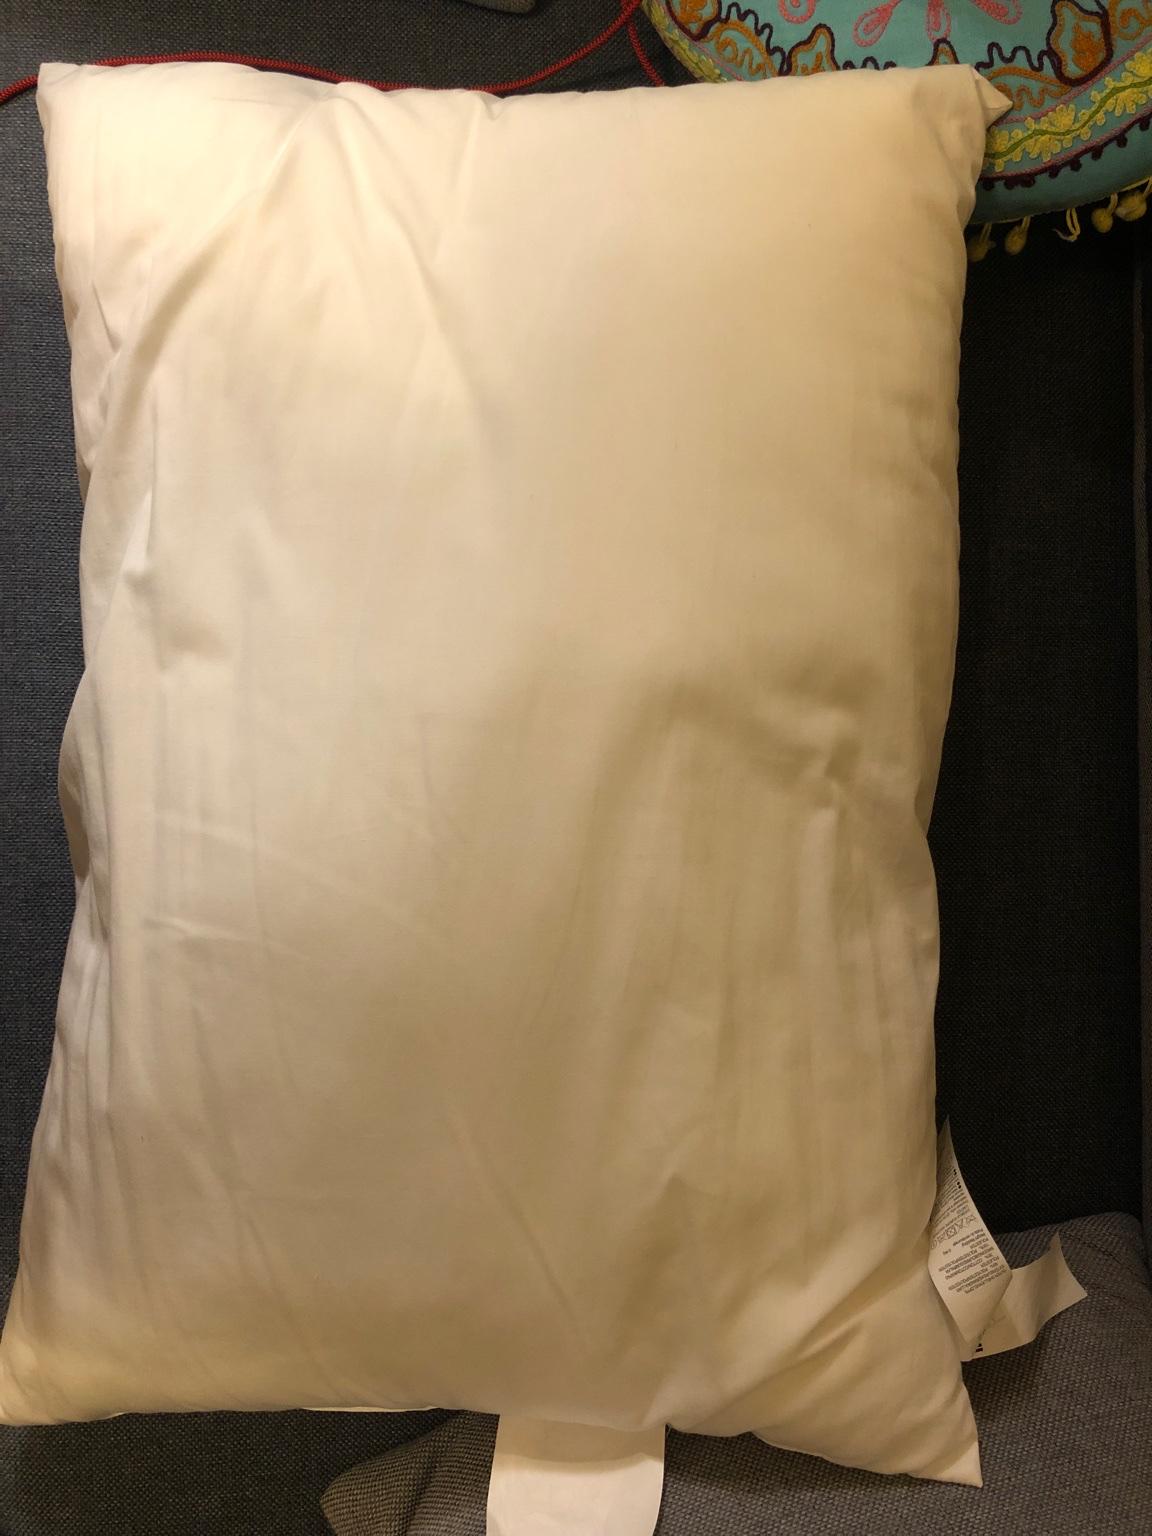 Muji pillow in N19 London for £10.00 for sale | Shpock